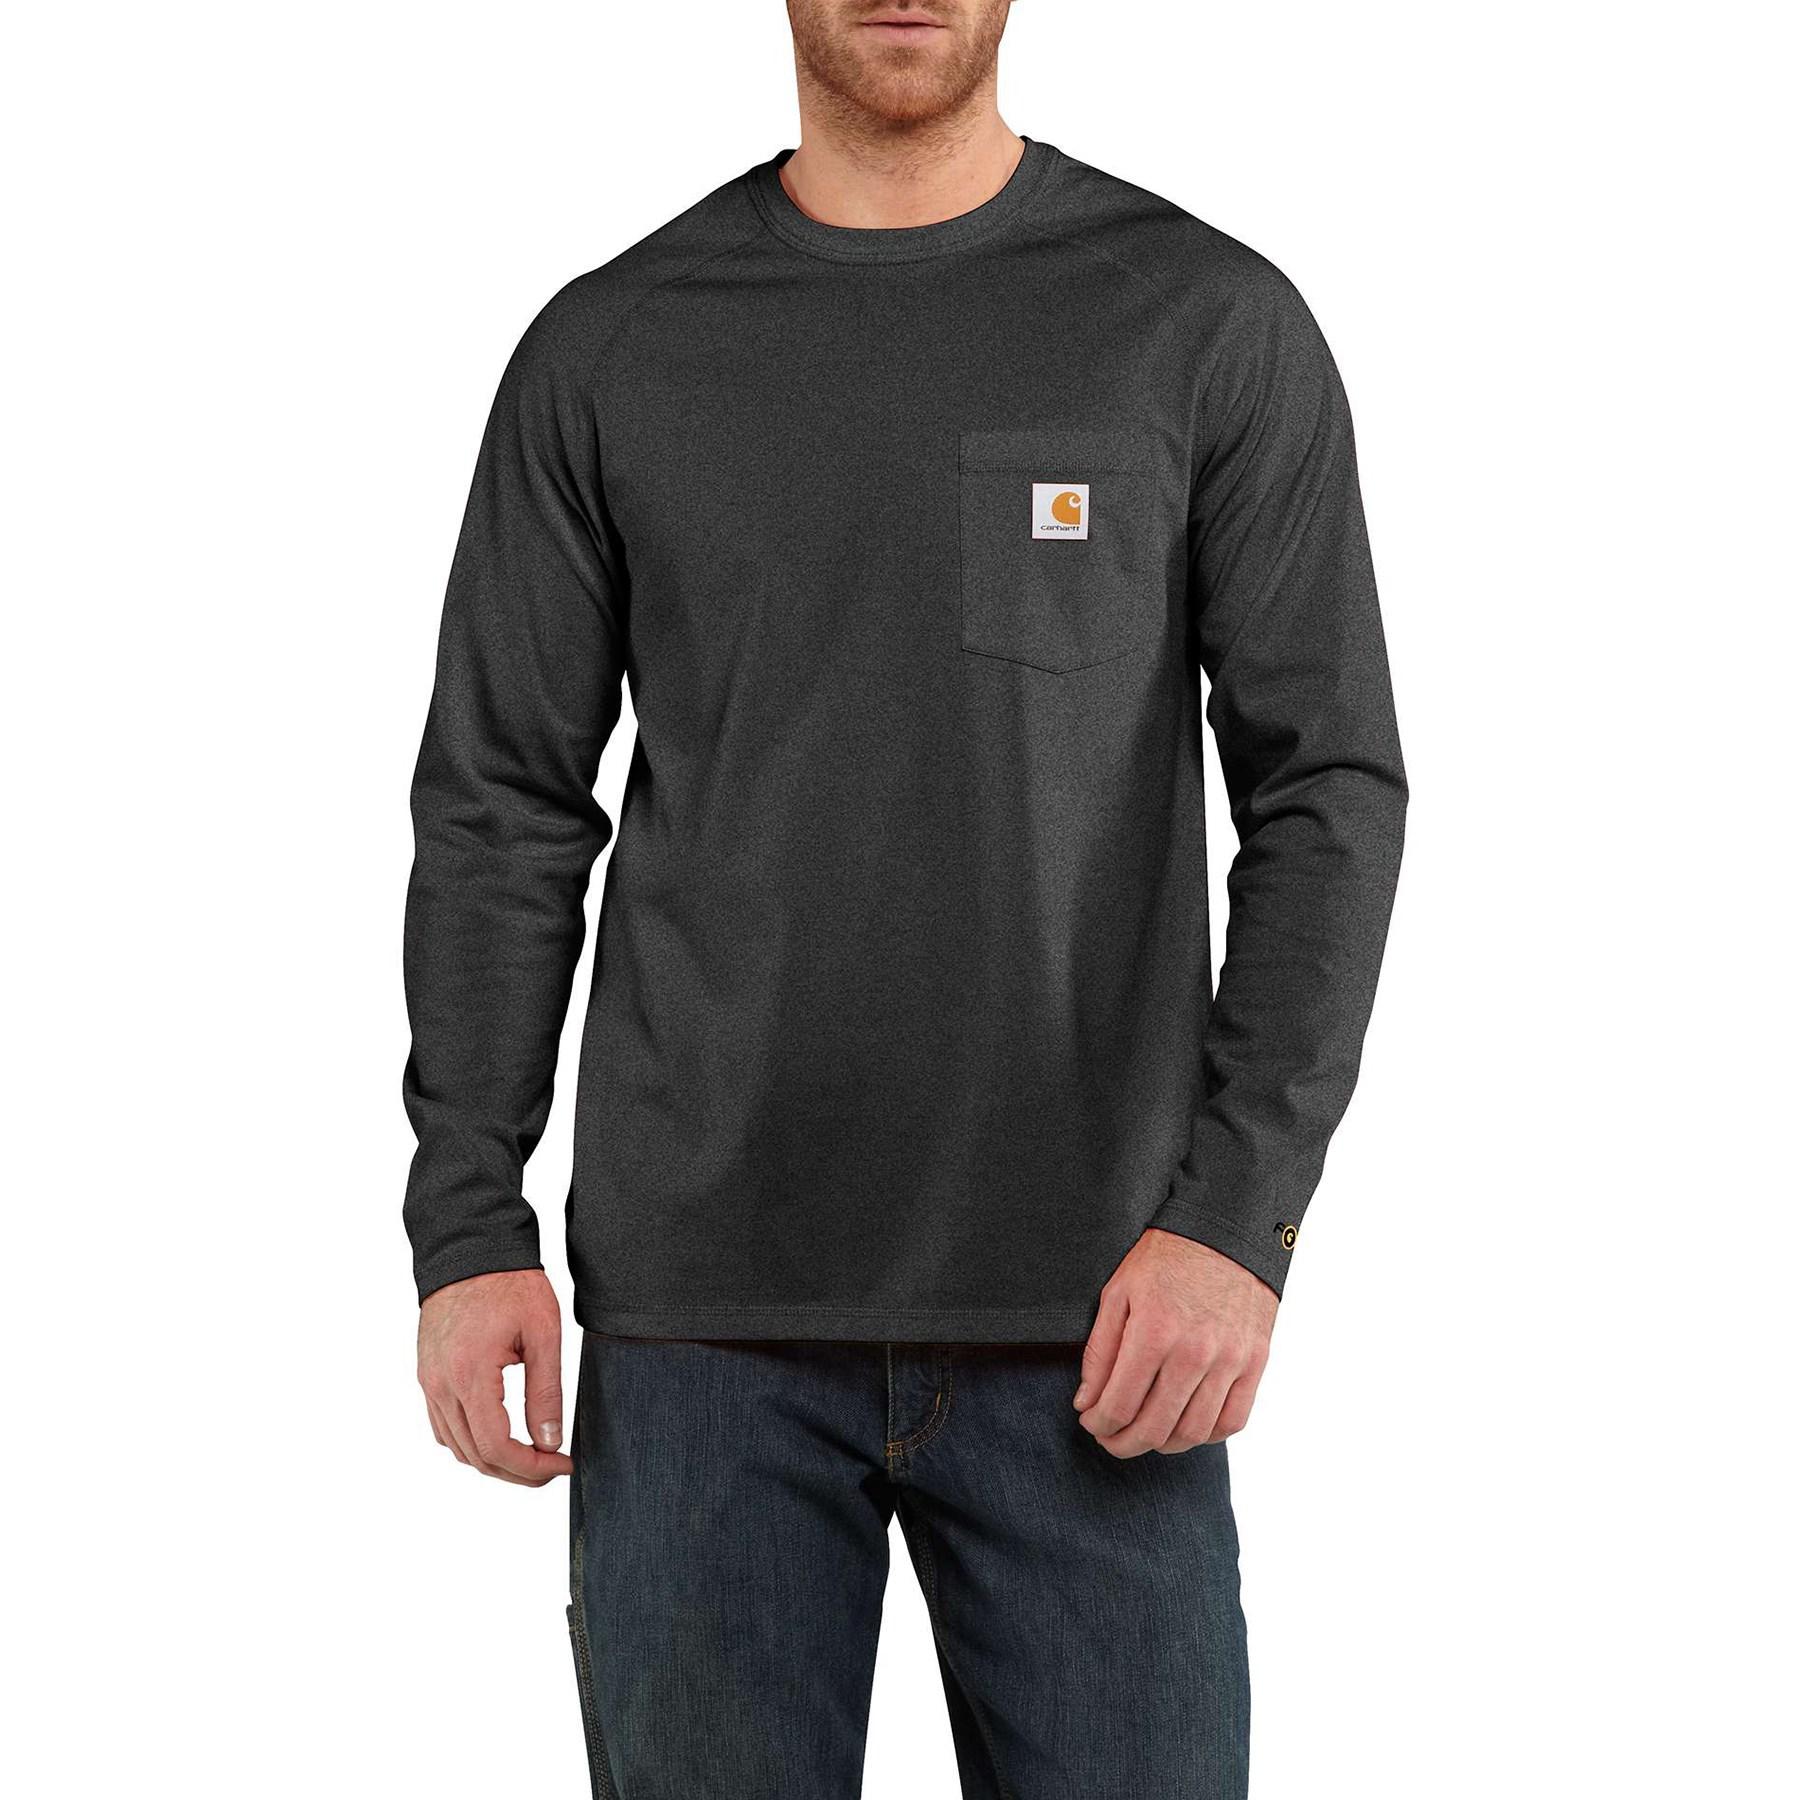 Lyst - Carhartt Force Cotton Delmont T-shirt in Black for Men